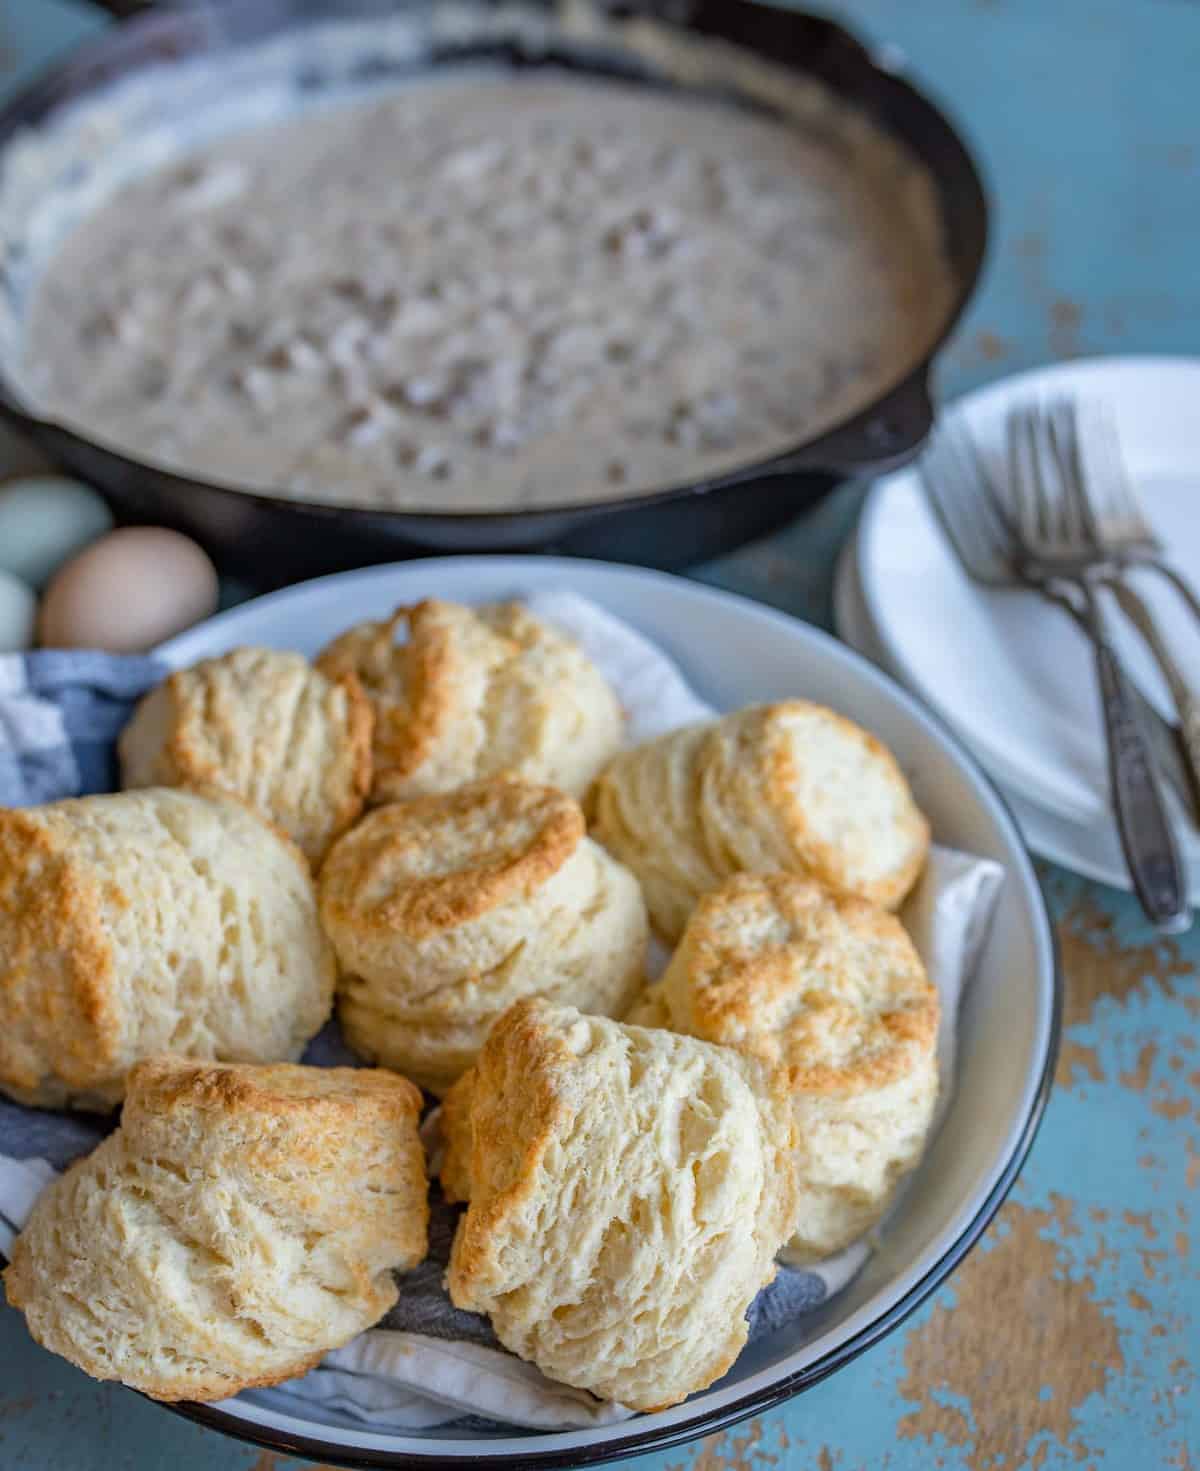 pan of biscuits ready to be served on a light blue table